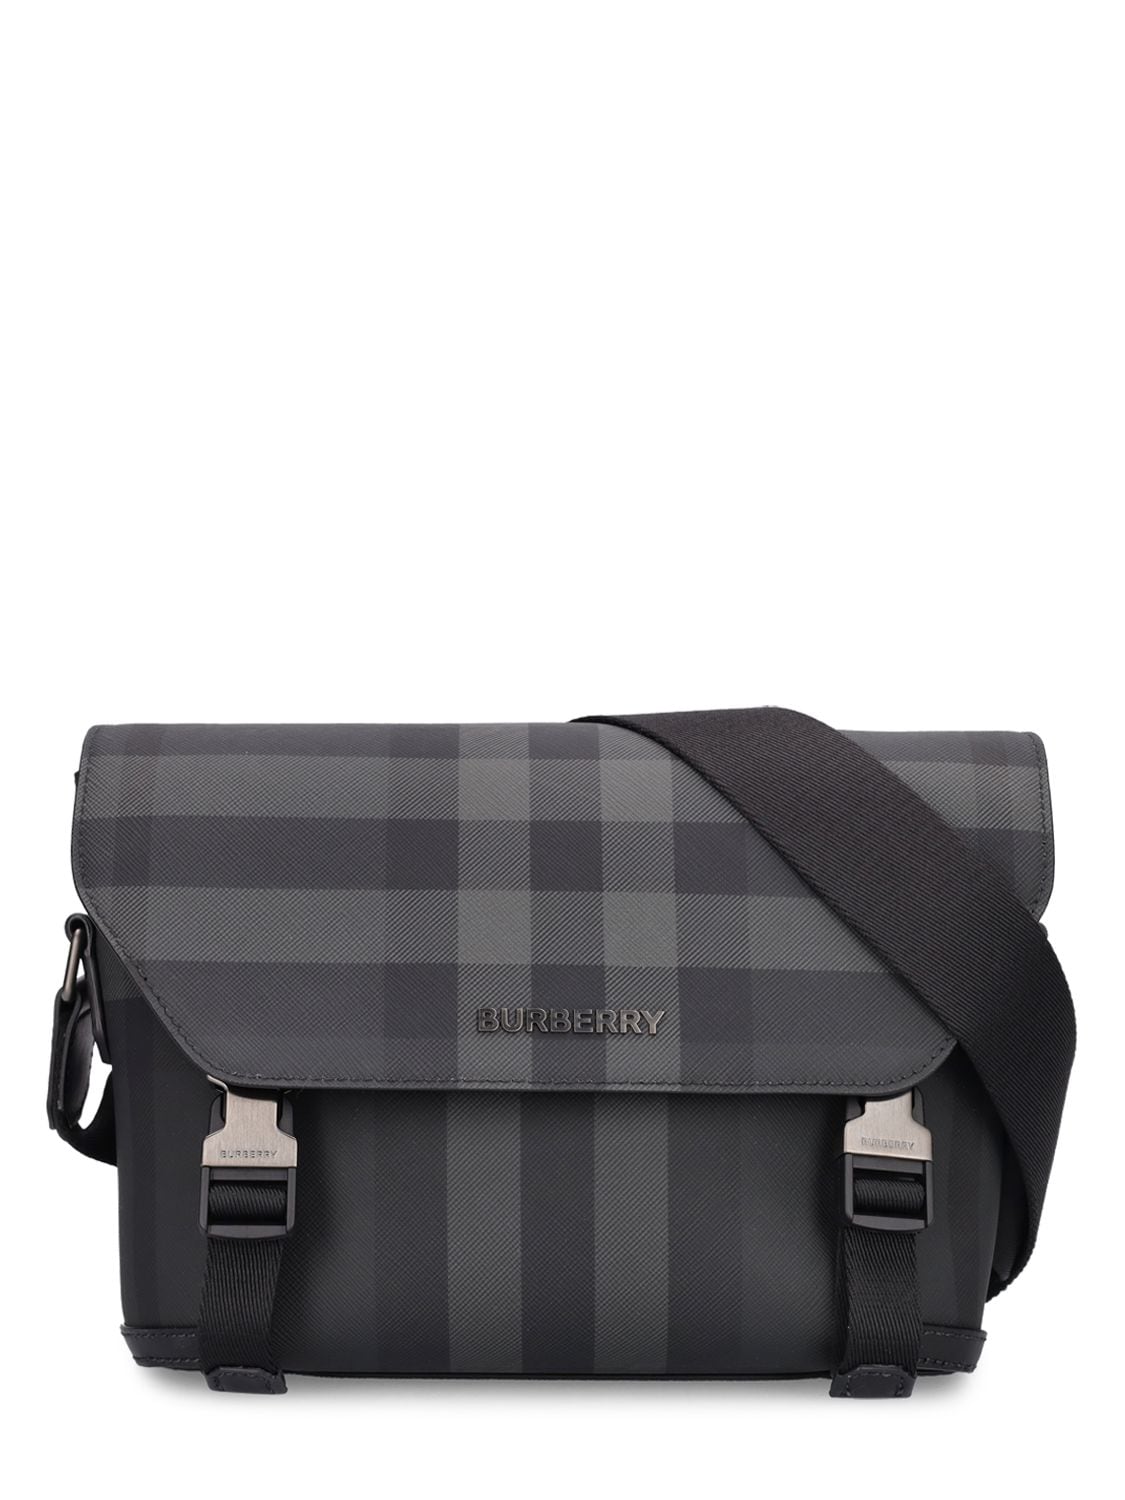 Burberry Small Crossbody Messenger In Charcoal